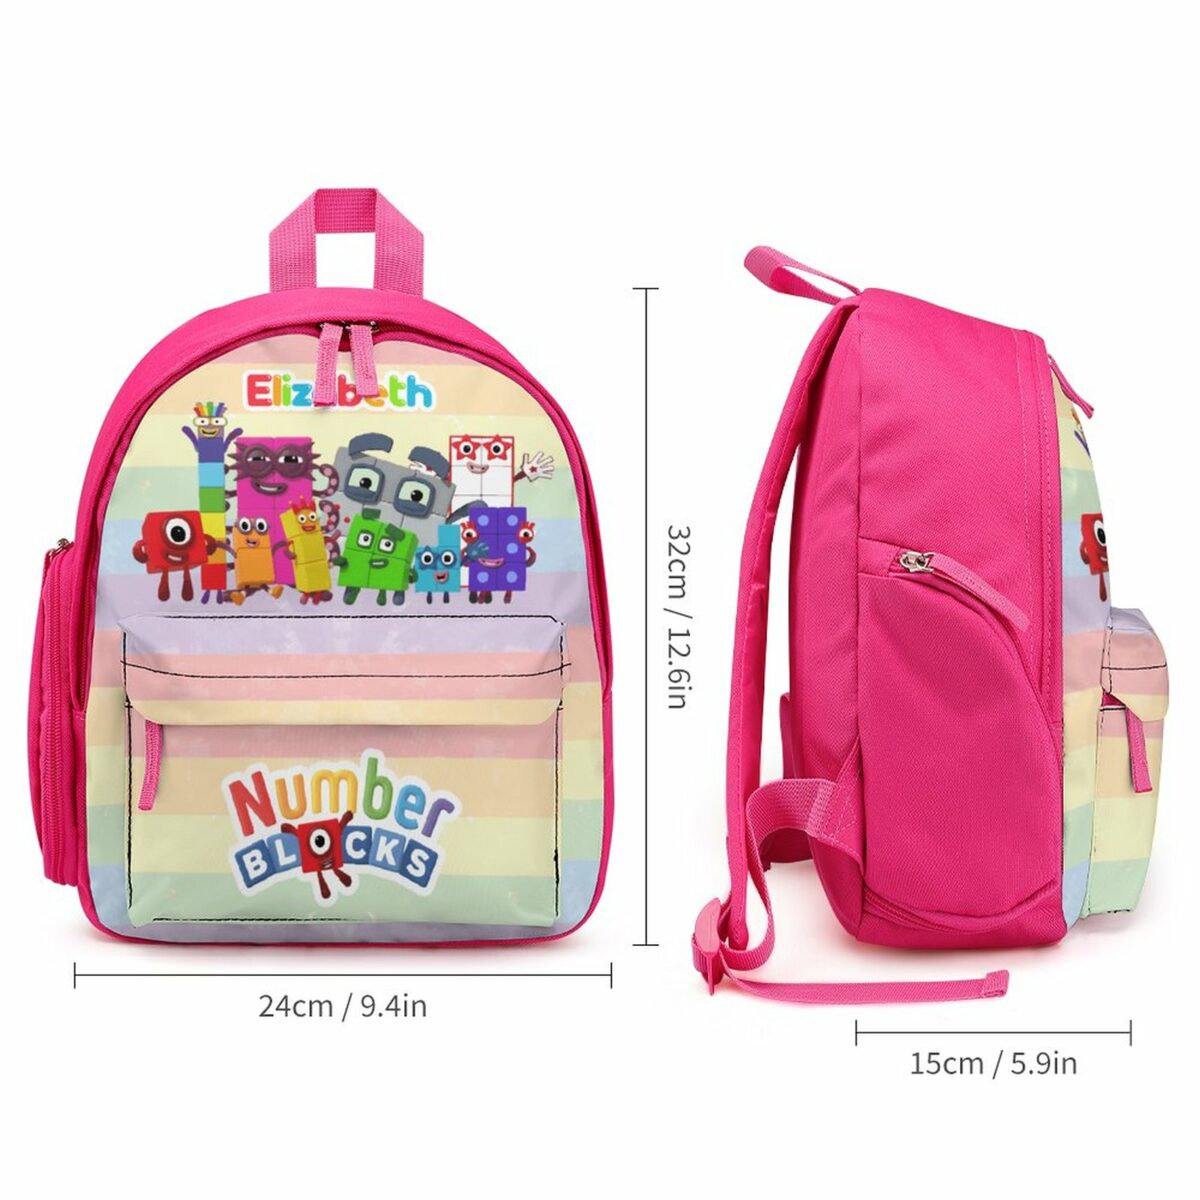 Personalized Number Blocks Children’s School Bag – Pink Toddlers Backpack Cool Kiddo 12